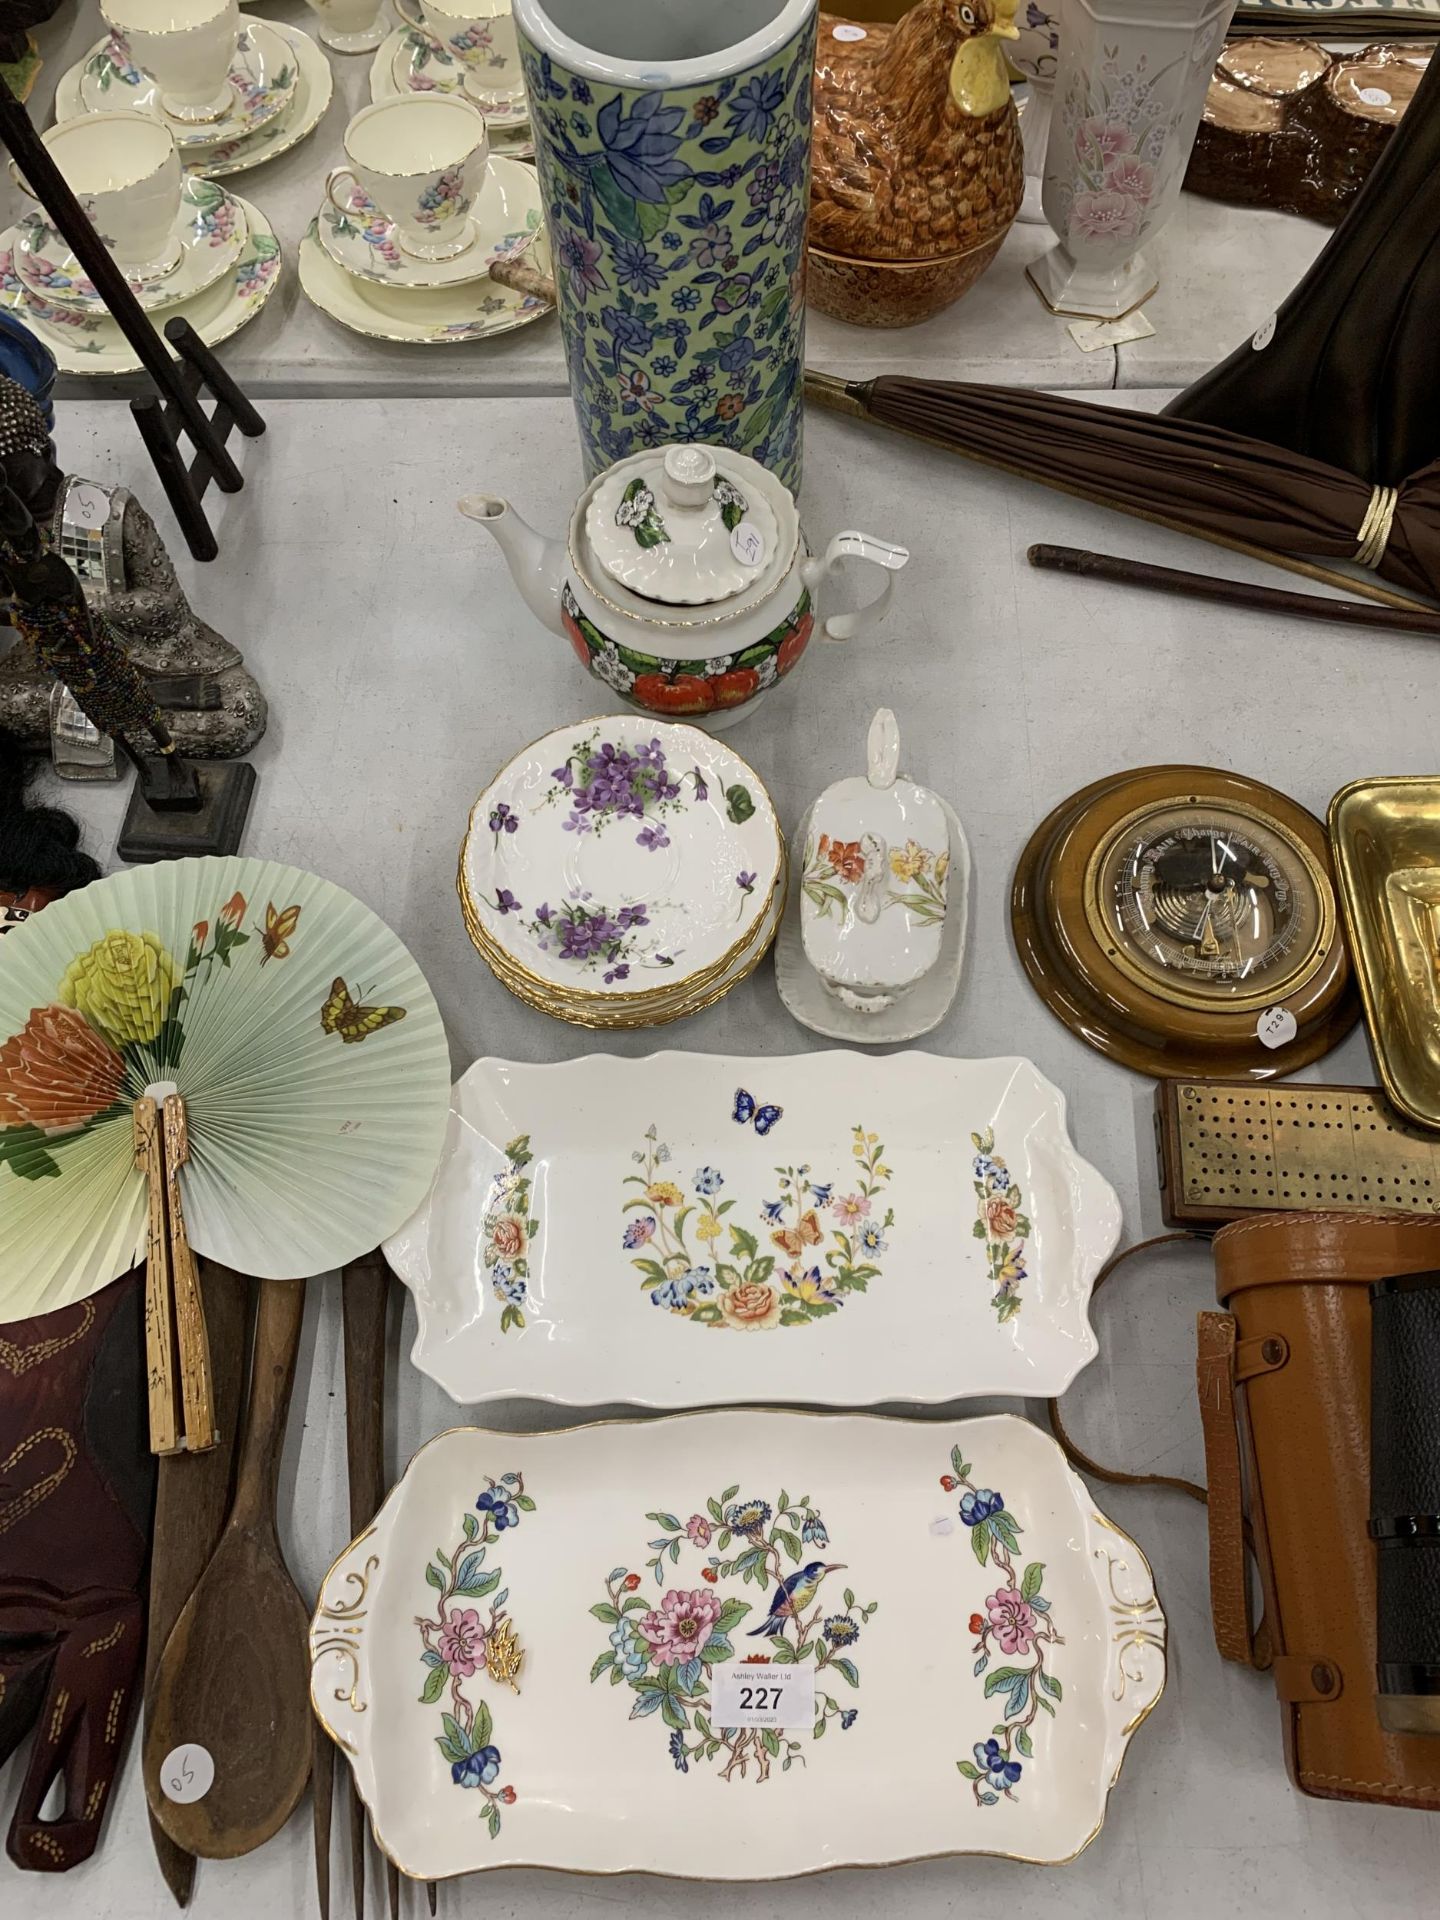 A QUANTITY OF CERAMIC ITEMS TO INCLUDE AYNSLEY SANDWICH TRAYS, A VASE, TEAPOT, PLATES, ETC